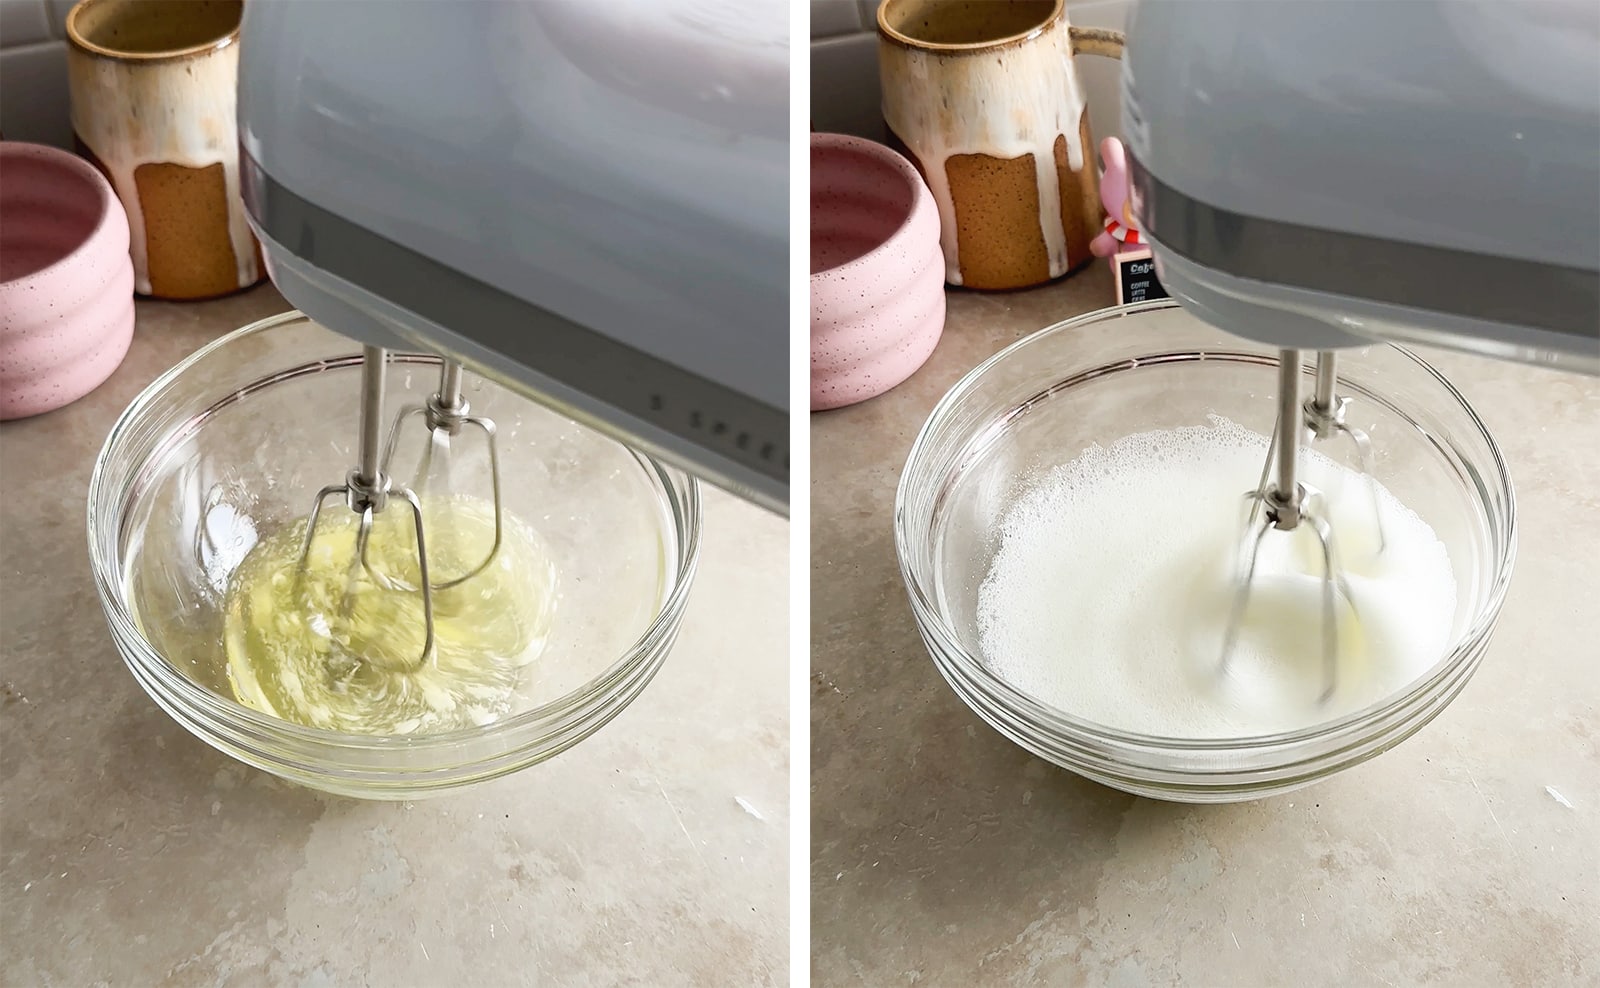 Left to right: beating egg whites in a bowl, beating foamy egg whites with a hand mixer.